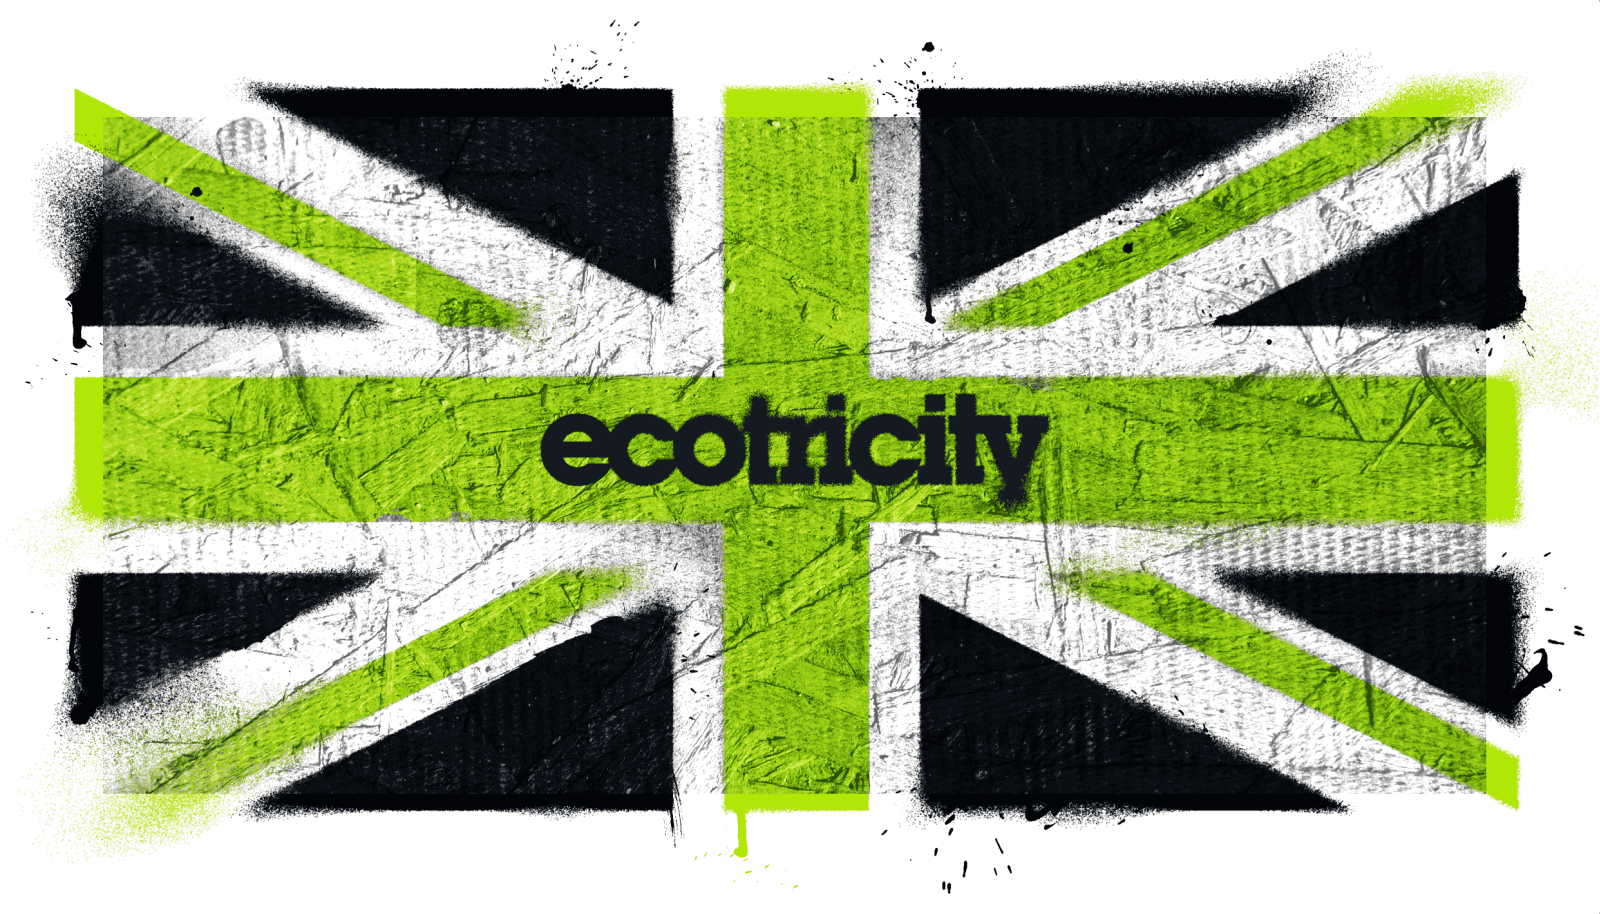 Union Jack flag in Ecotricity colours